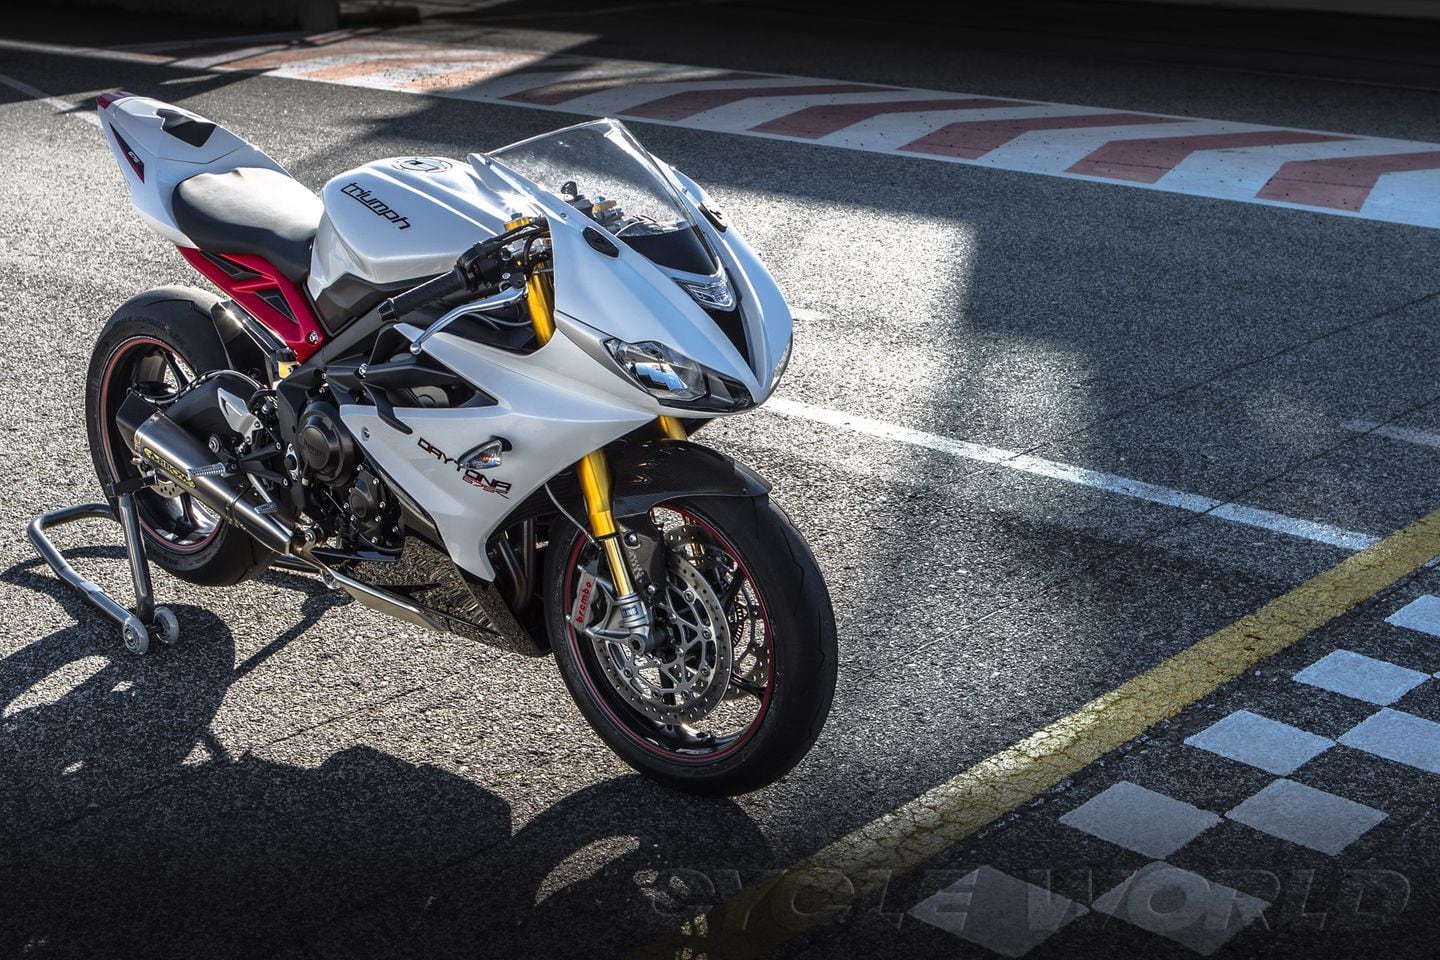 13 Triumph Daytona 675r First Ride Review Photos Cycle World